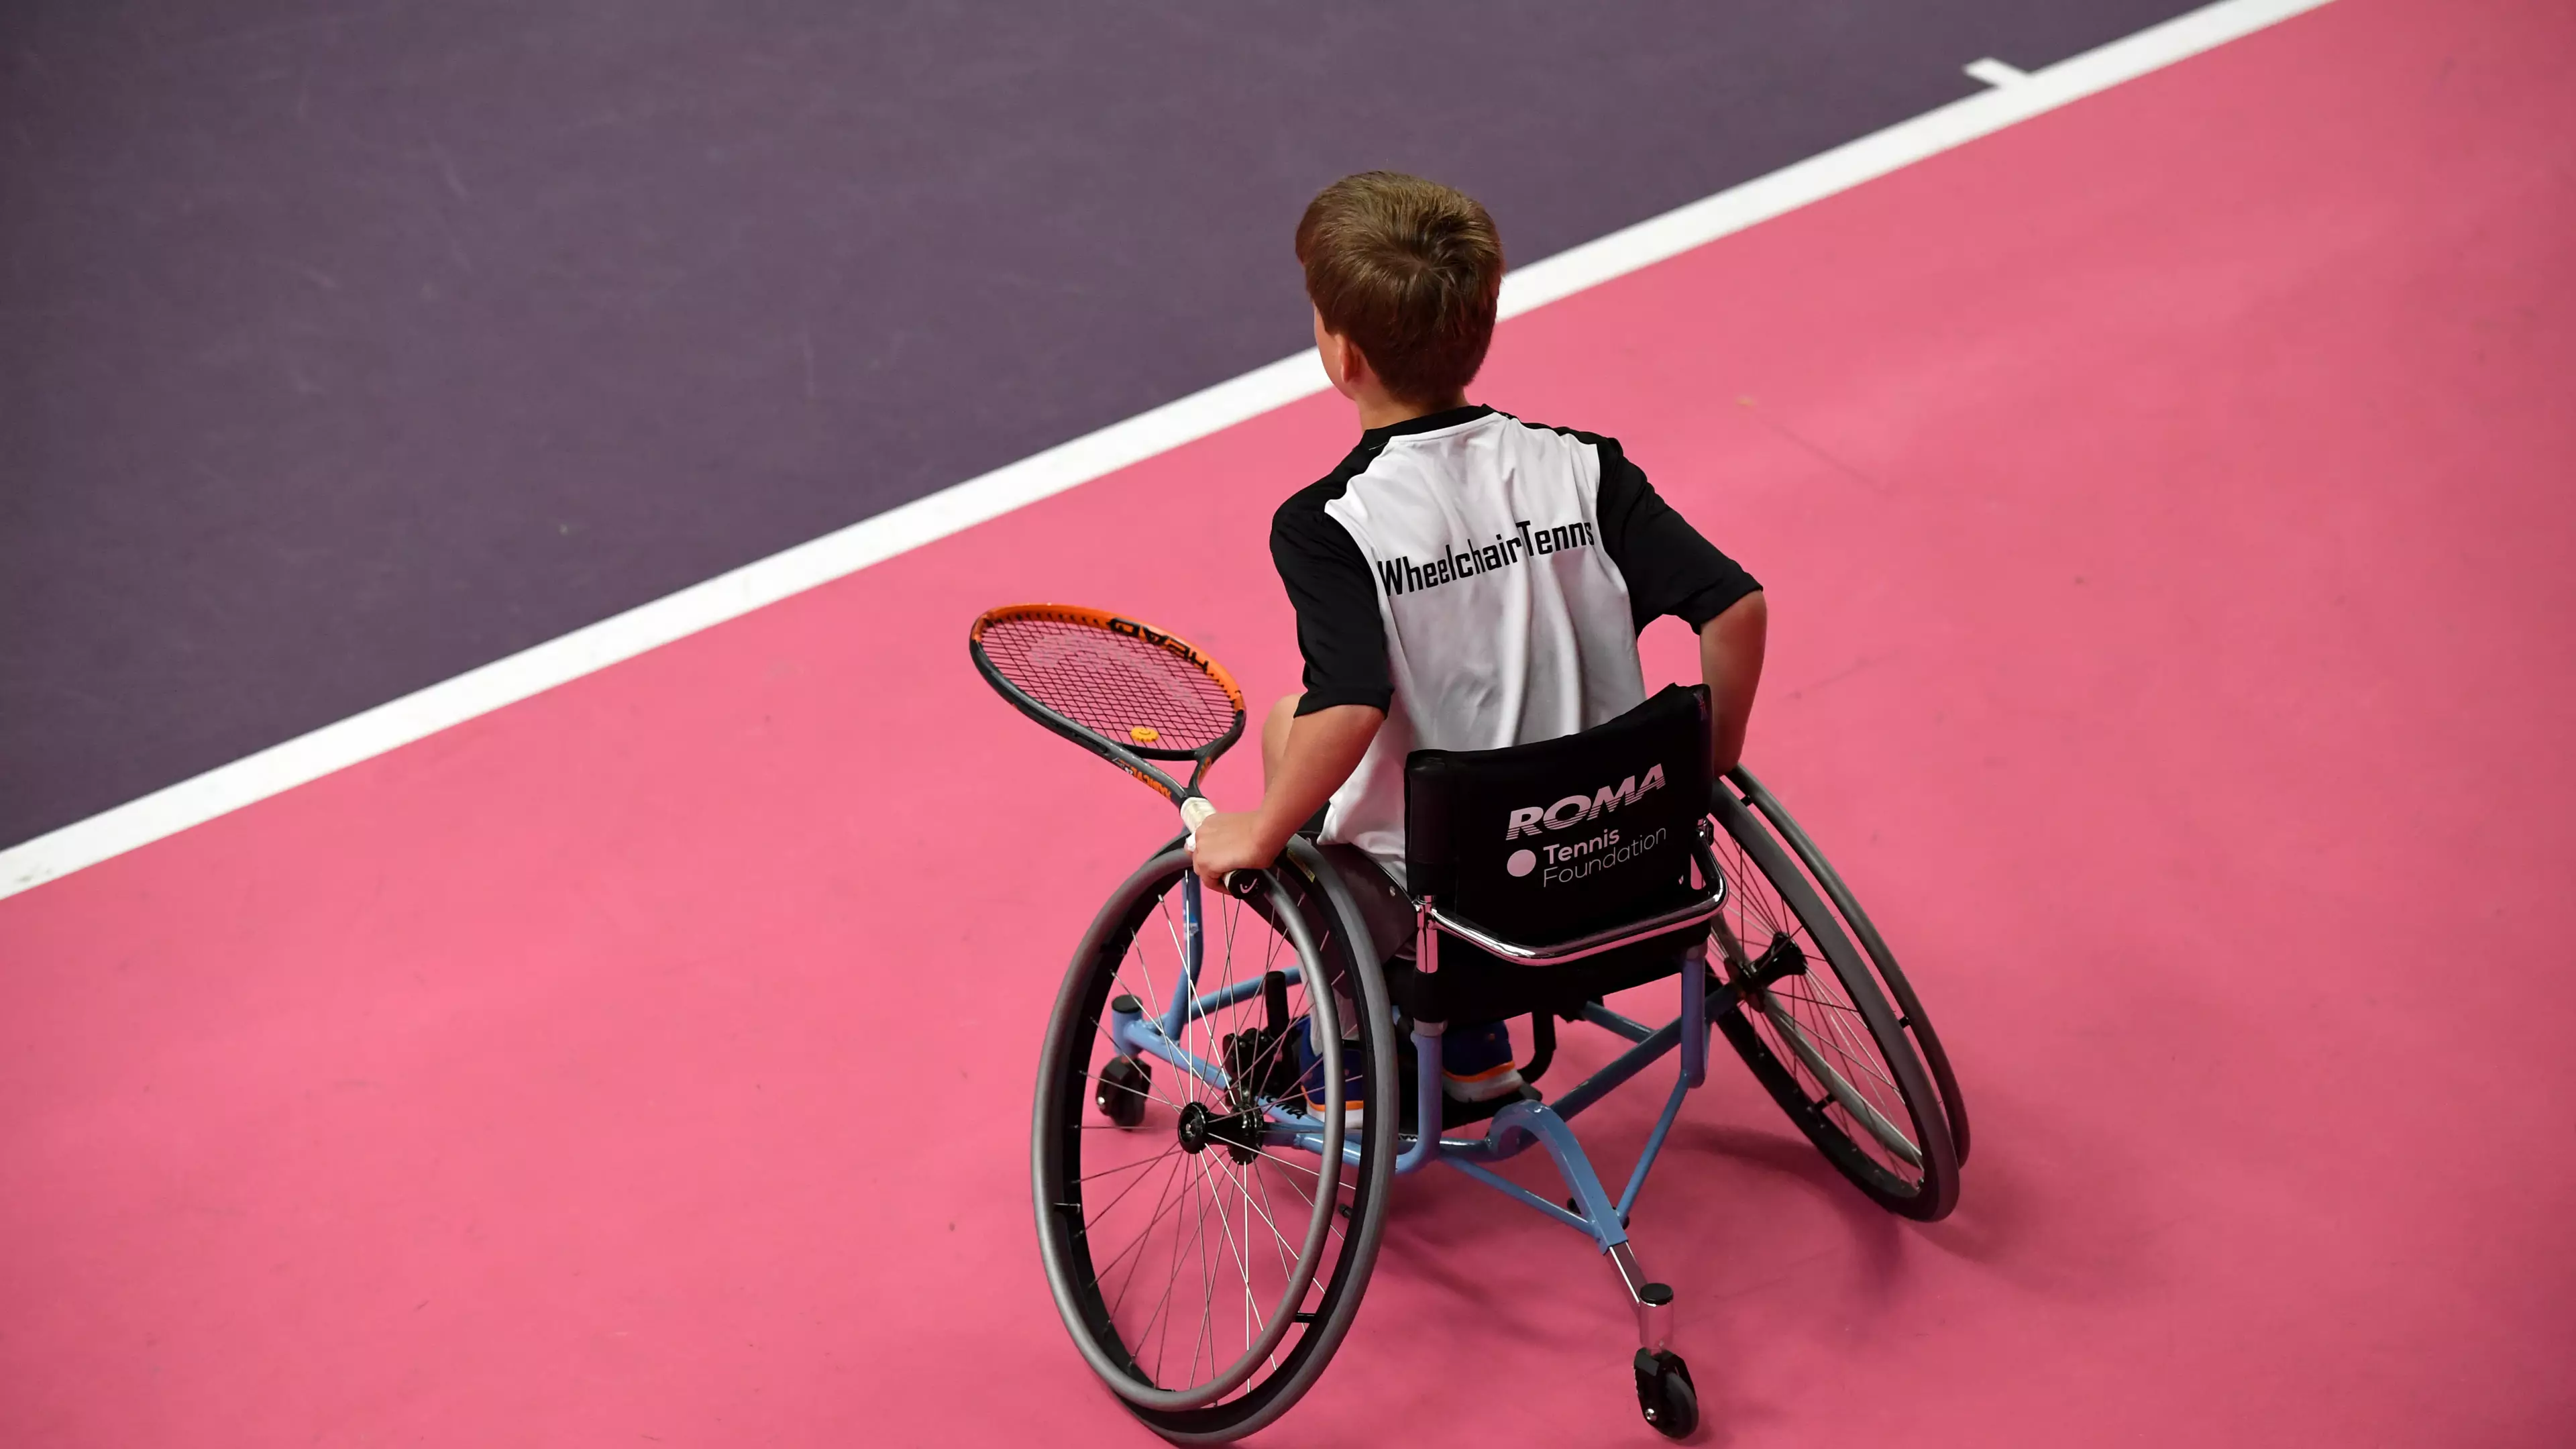 Darwin Wheelchair Tennis Competition Moved Because Courts Were Built On A Slope